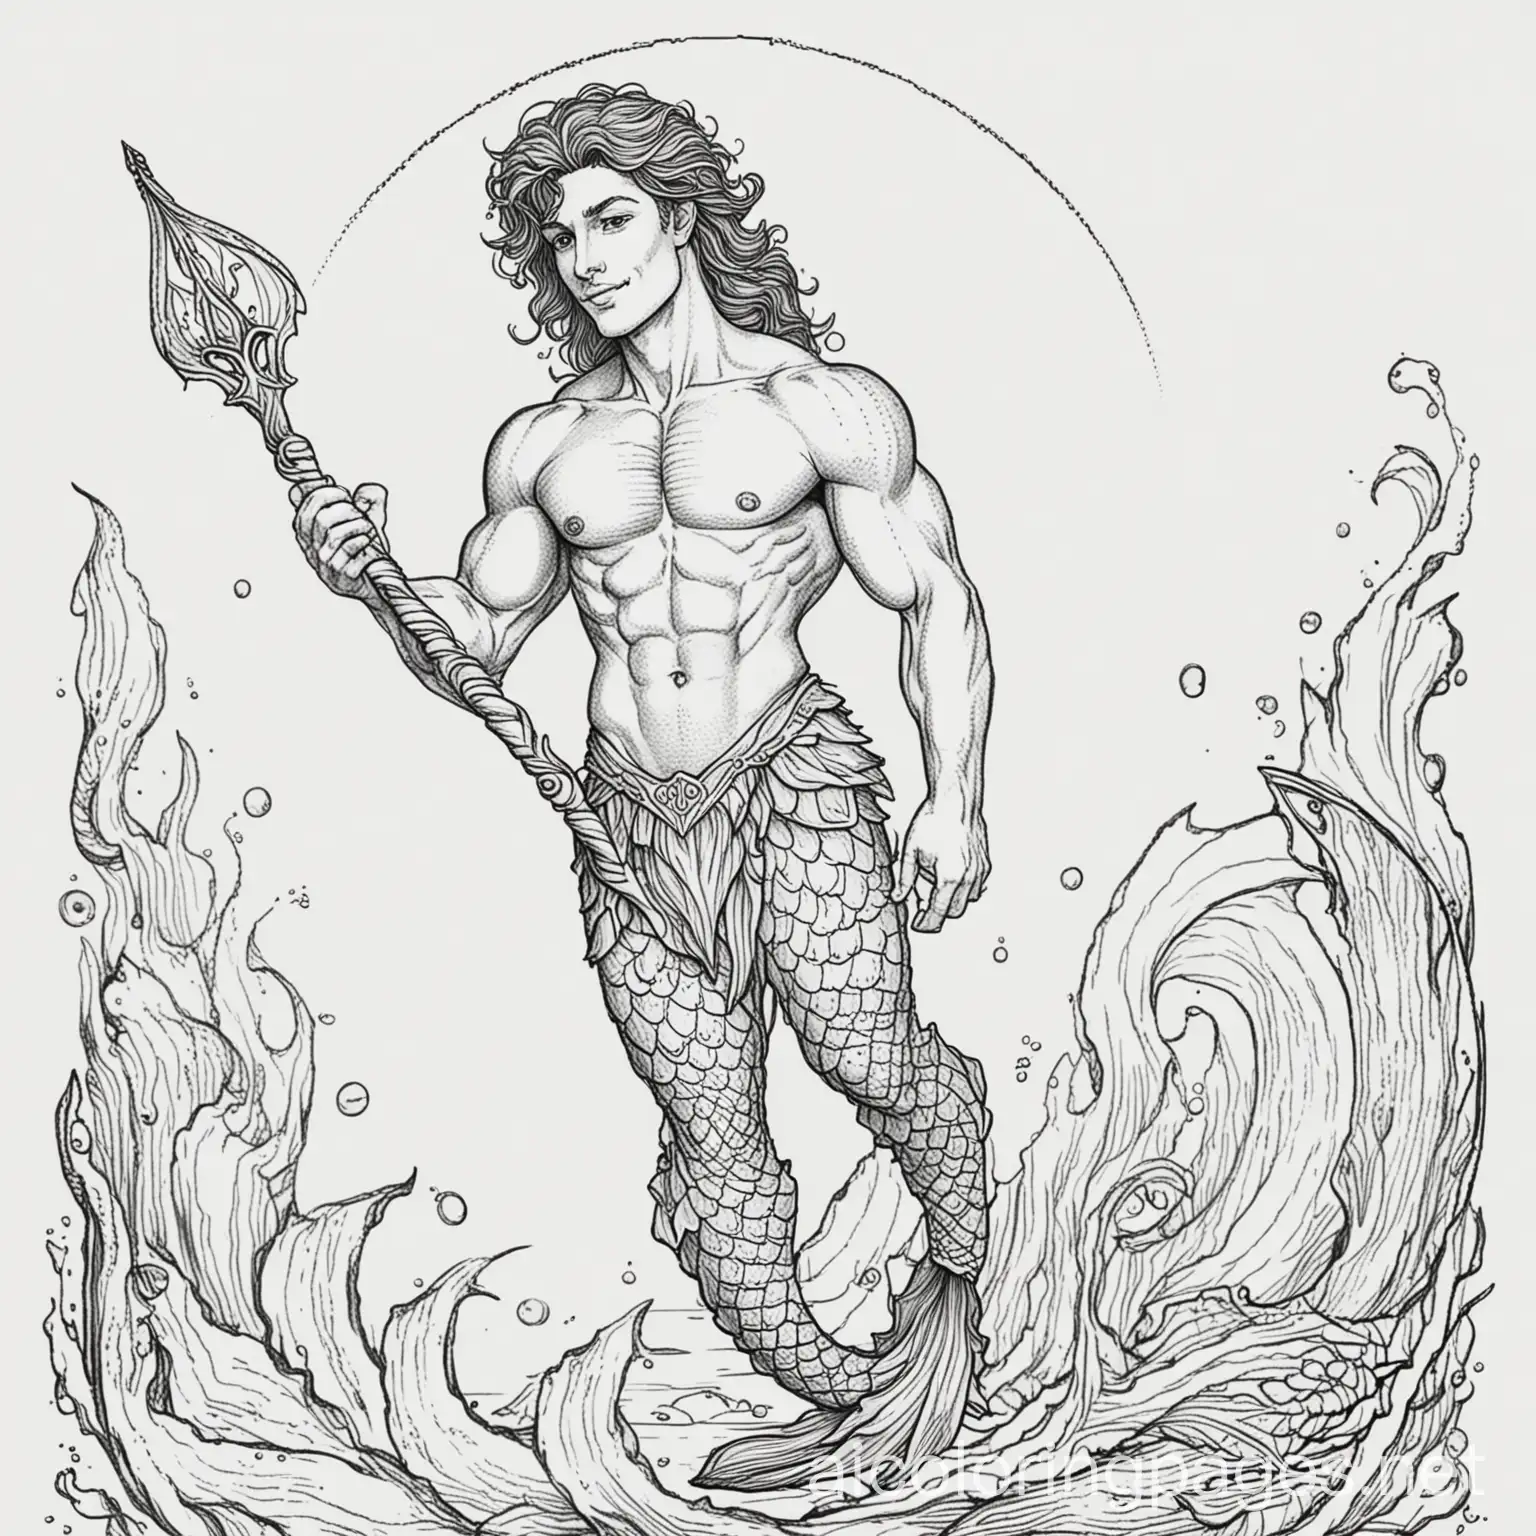 Merman-Coloring-Page-with-Ample-White-Space